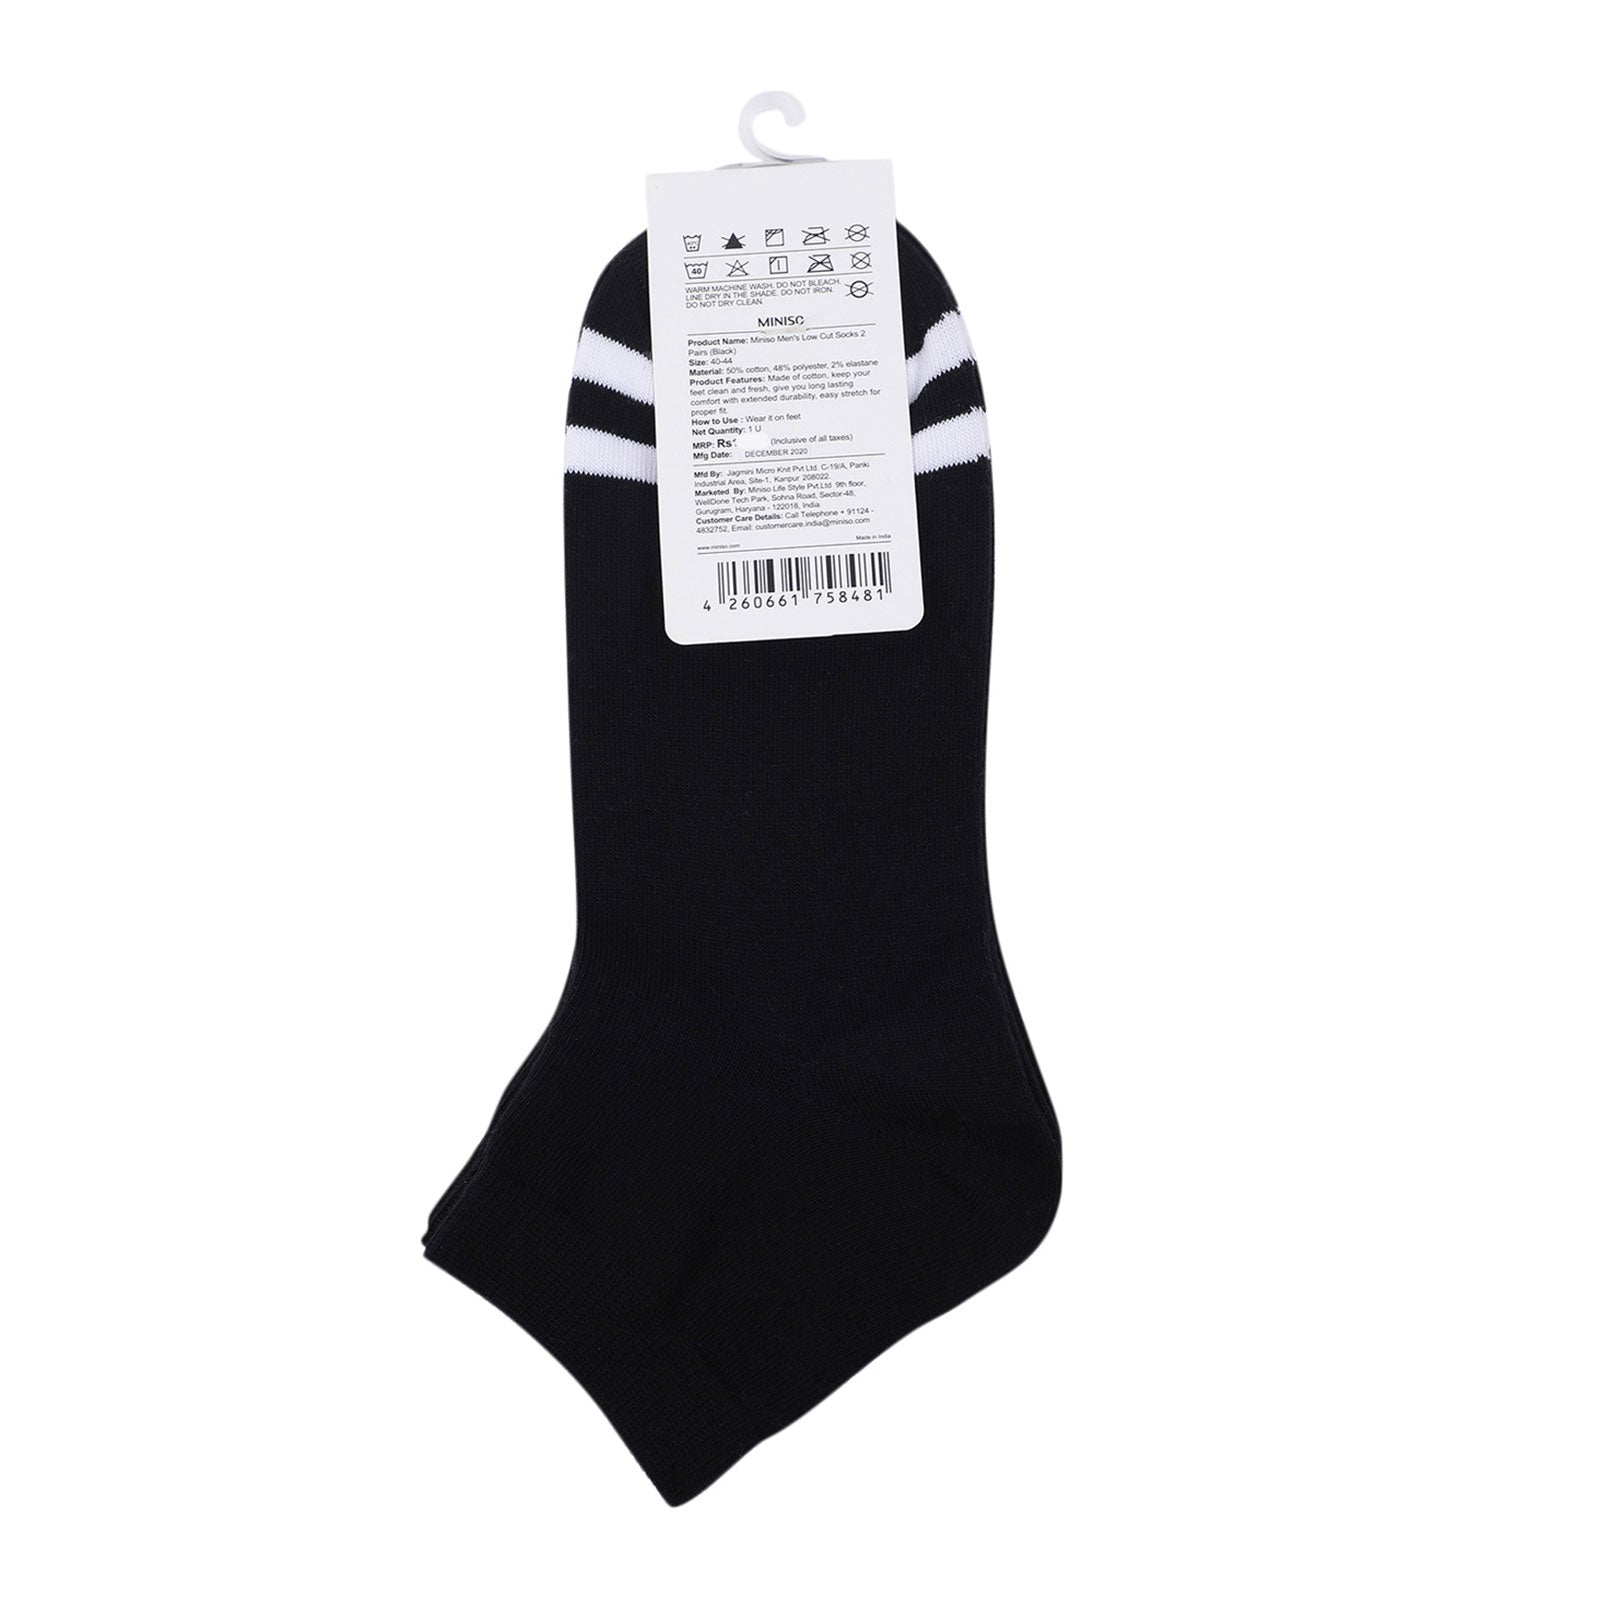 MINISO Men's Cotton Solid Stripe Low Cut Socks Combo Pack of 2 | Miniso ...